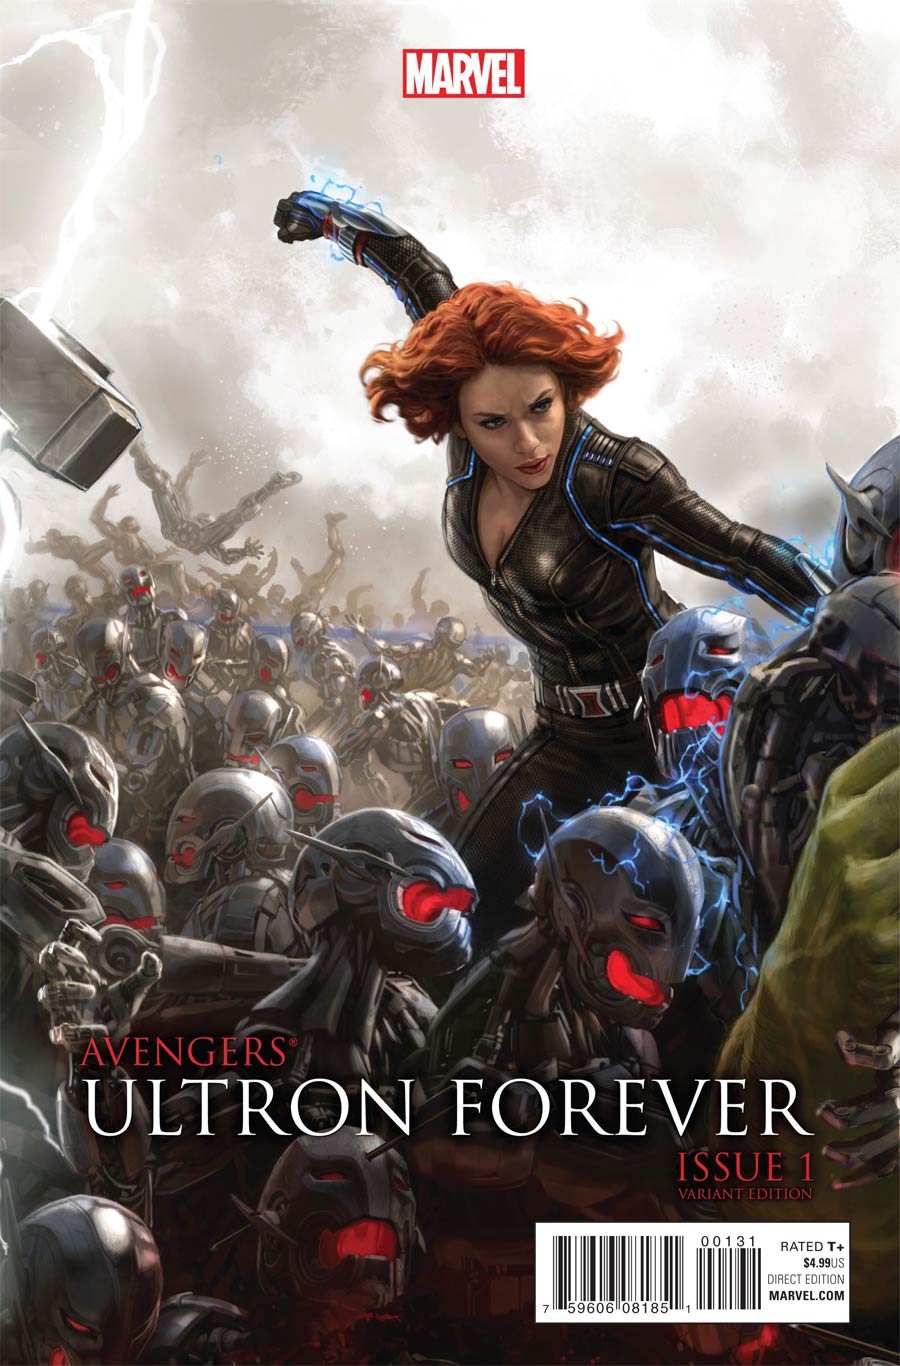 Avengers Ultron Forever #1 Cover D Incentive Avengers Age Of Ultron Movie Connecting B Variant Cover (Ultron Forever Part 1)